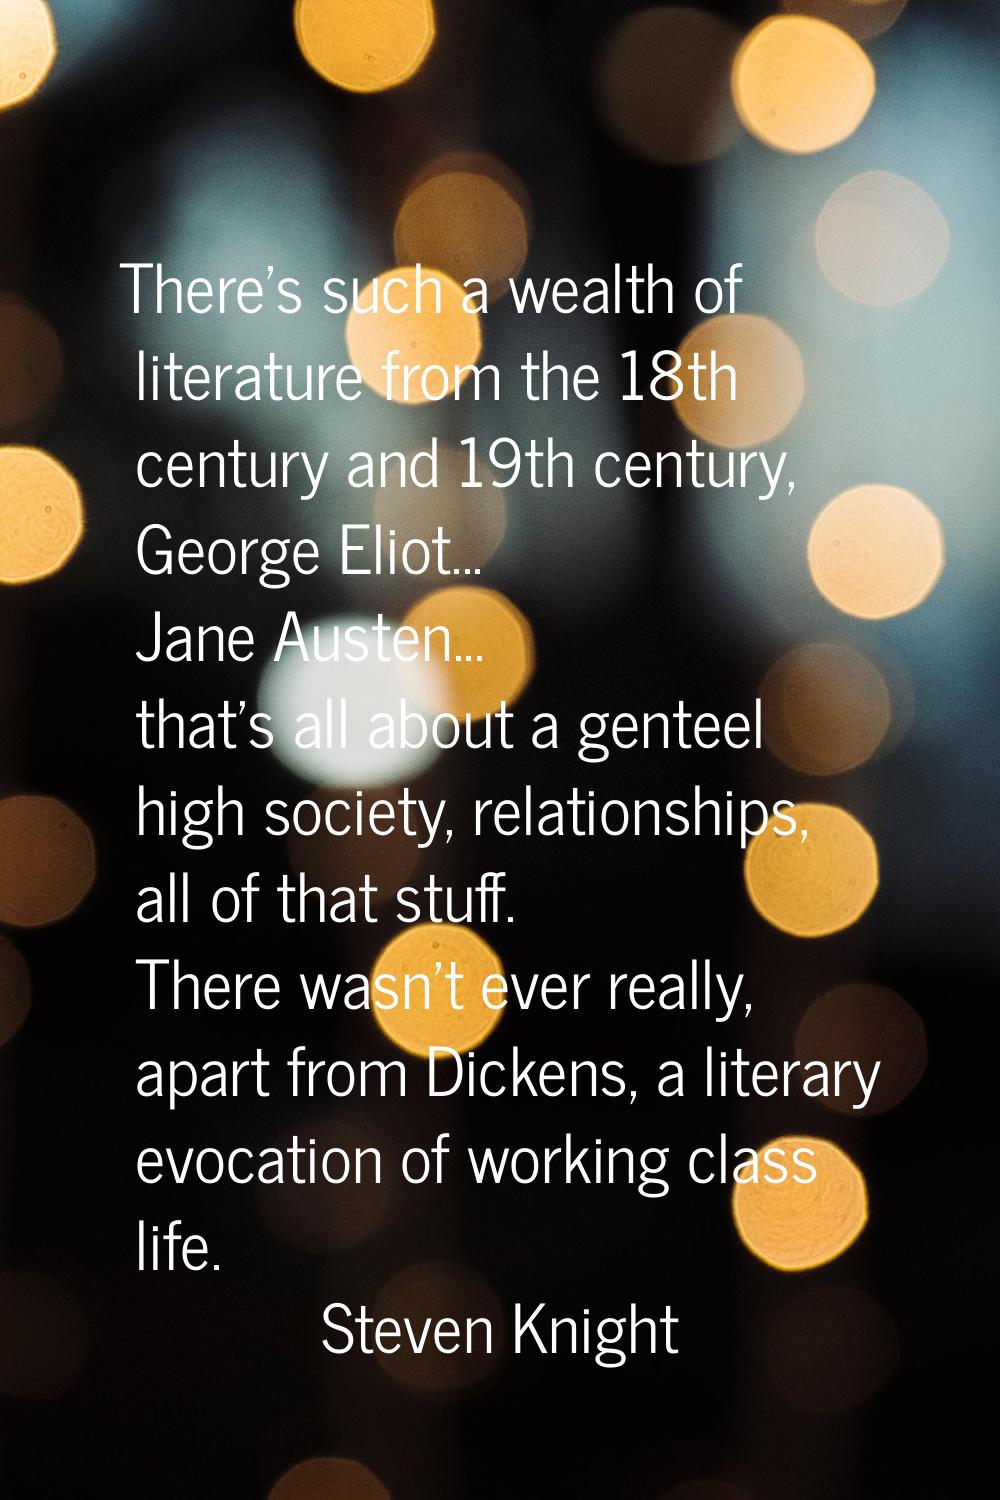 There's such a wealth of literature from the 18th century and 19th century, George Eliot... Jane Au